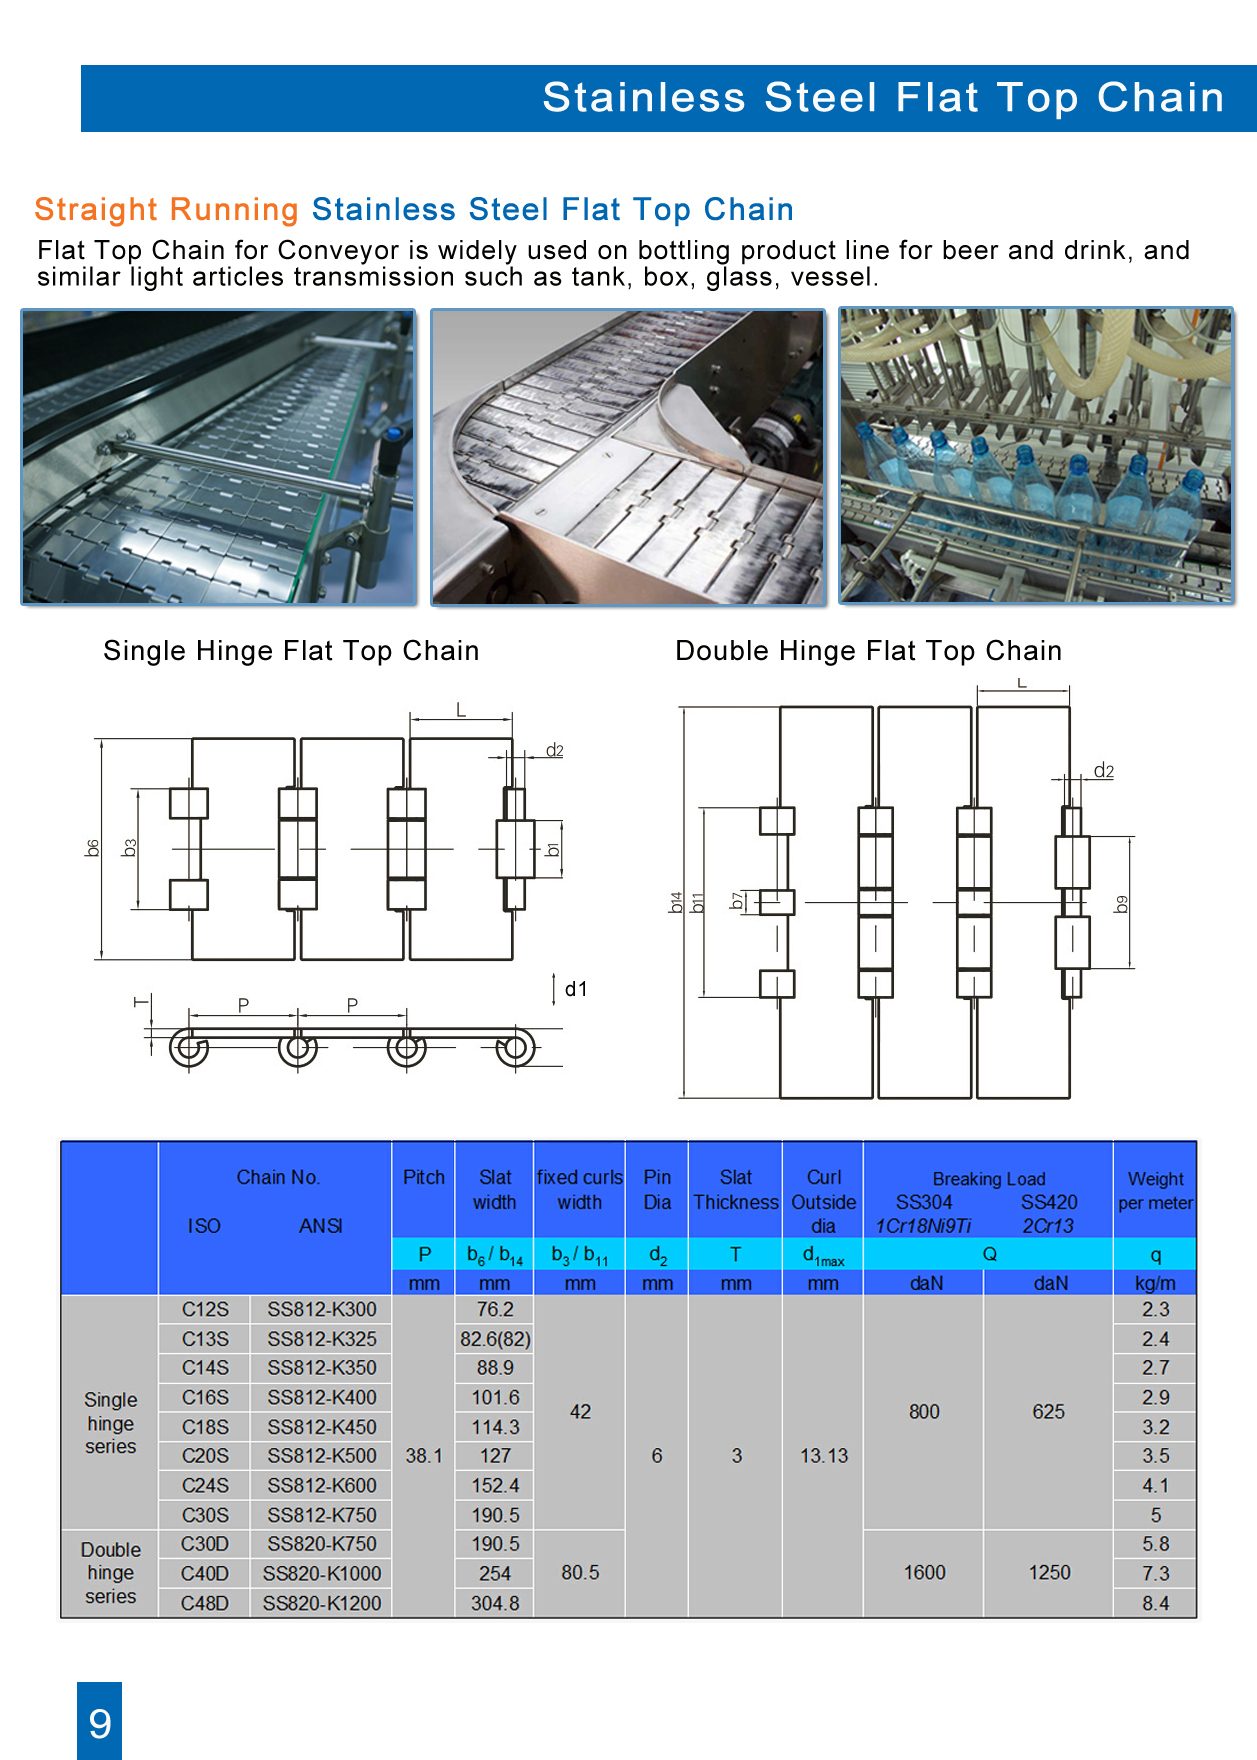 Anti-corrosion stainless steel flat top chain system